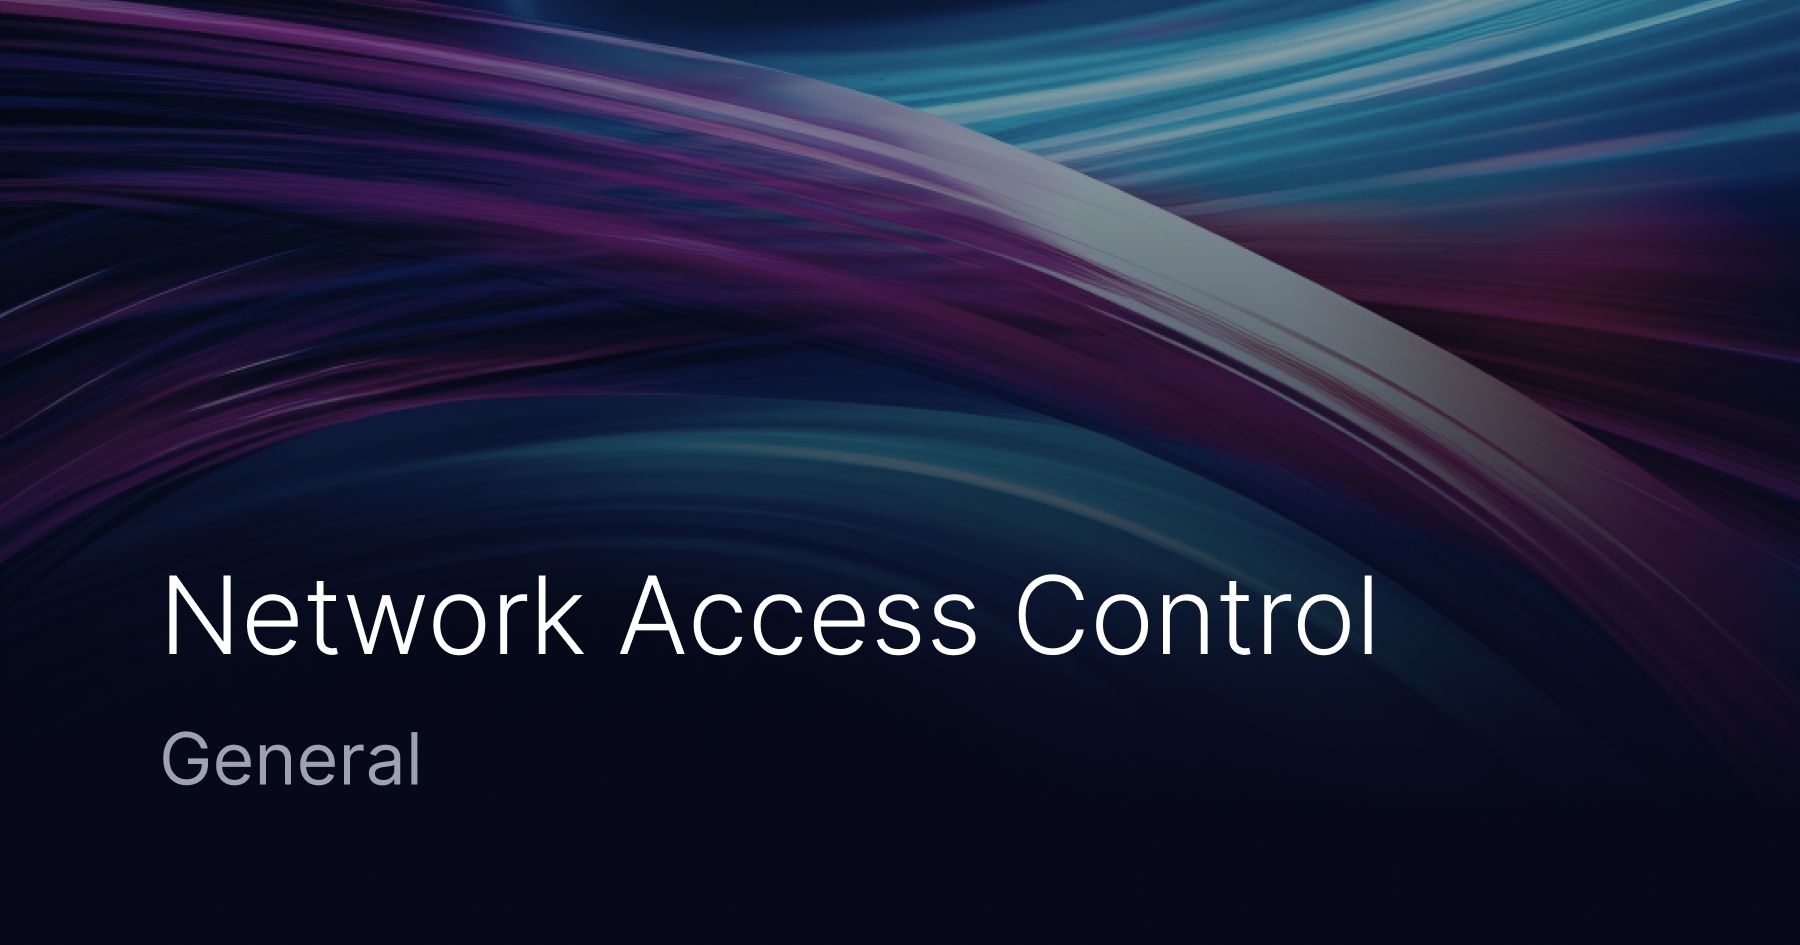 What is Network Access Control (NAC)?